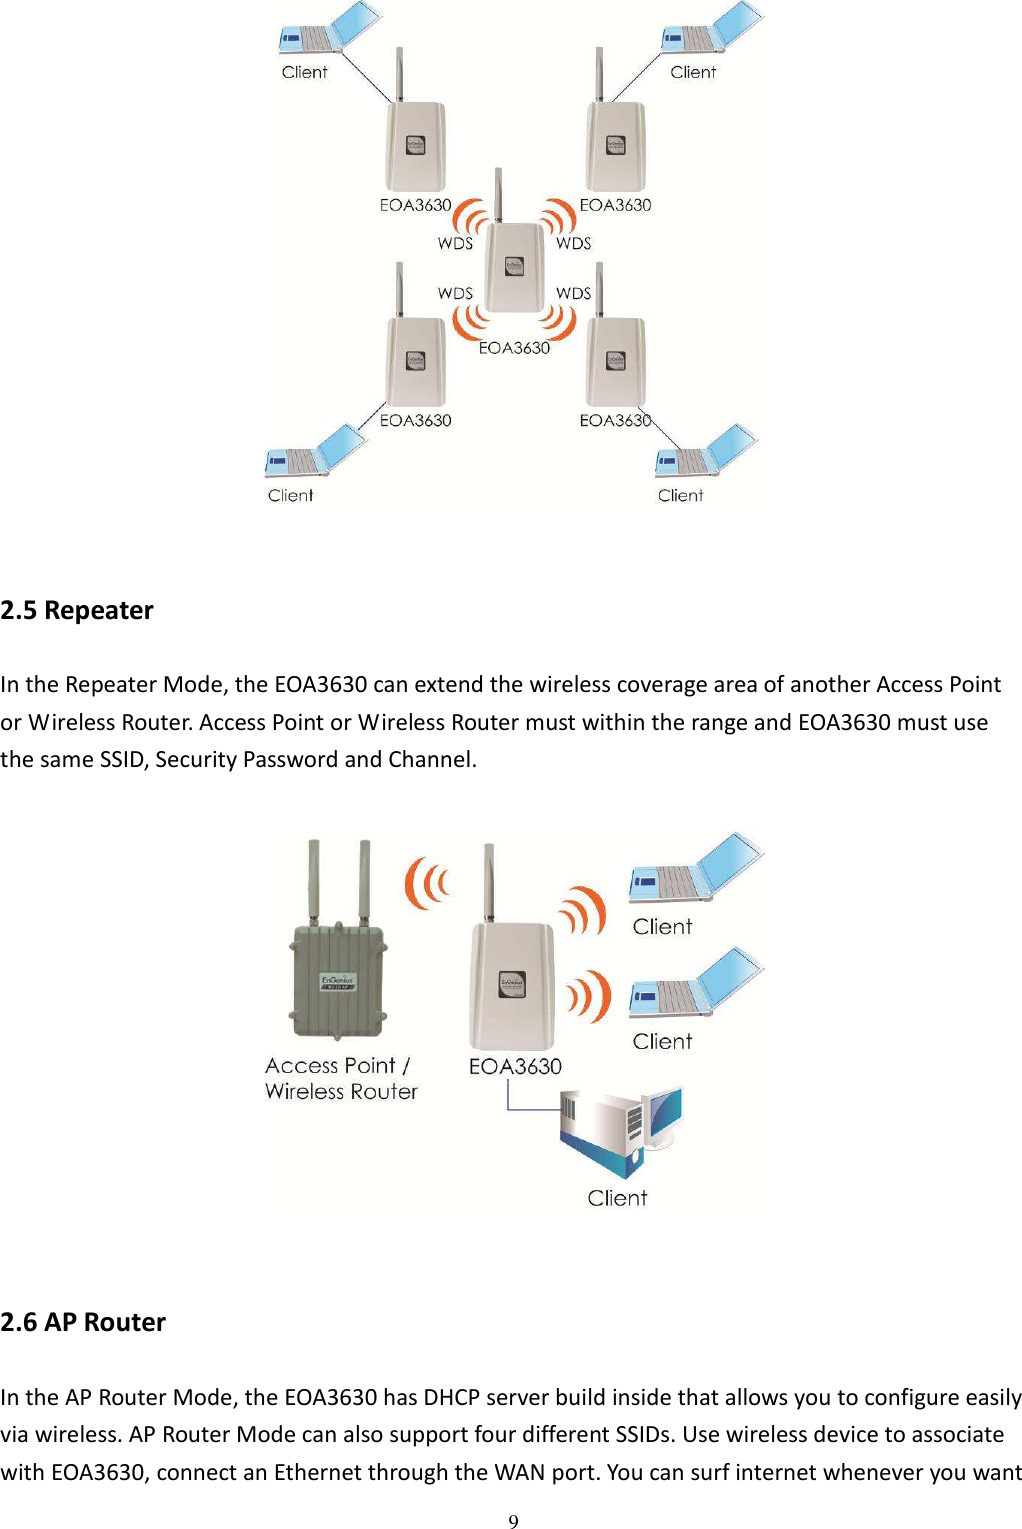   9   2.5 Repeater In the Repeater Mode, the EOA3630 can extend the wireless coverage area of another Access Point or Wireless Router. Access Point or Wireless Router must within the range and EOA3630 must use the same SSID, Security Password and Channel.    2.6 AP Router In the AP Router Mode, the EOA3630 has DHCP server build inside that allows you to configure easily via wireless. AP Router Mode can also support four different SSIDs. Use wireless device to associate with EOA3630, connect an Ethernet through the WAN port. You can surf internet whenever you want 